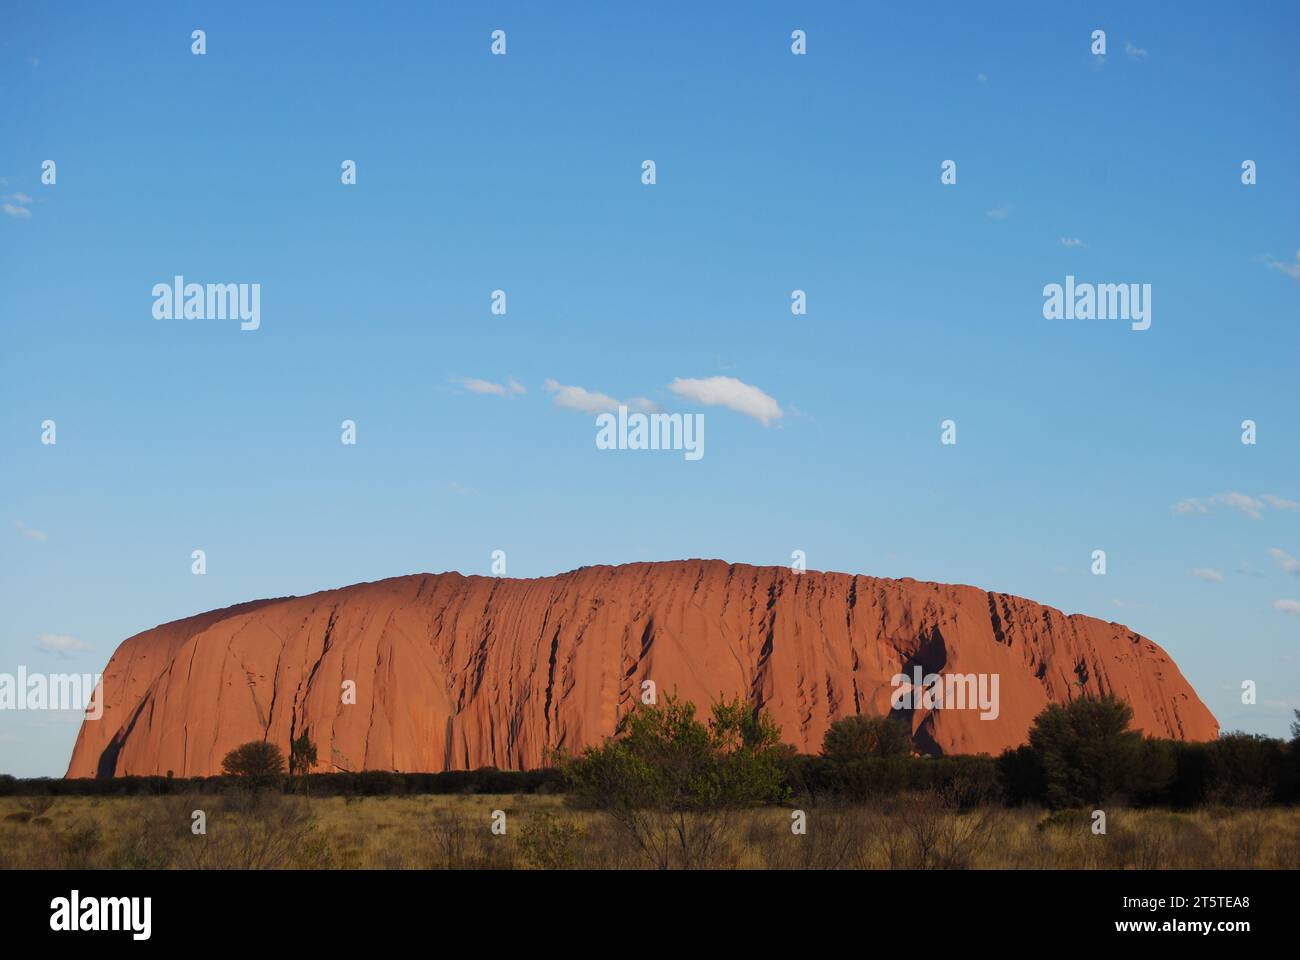 Ayers rock and the clear blue sky. Stock Photo